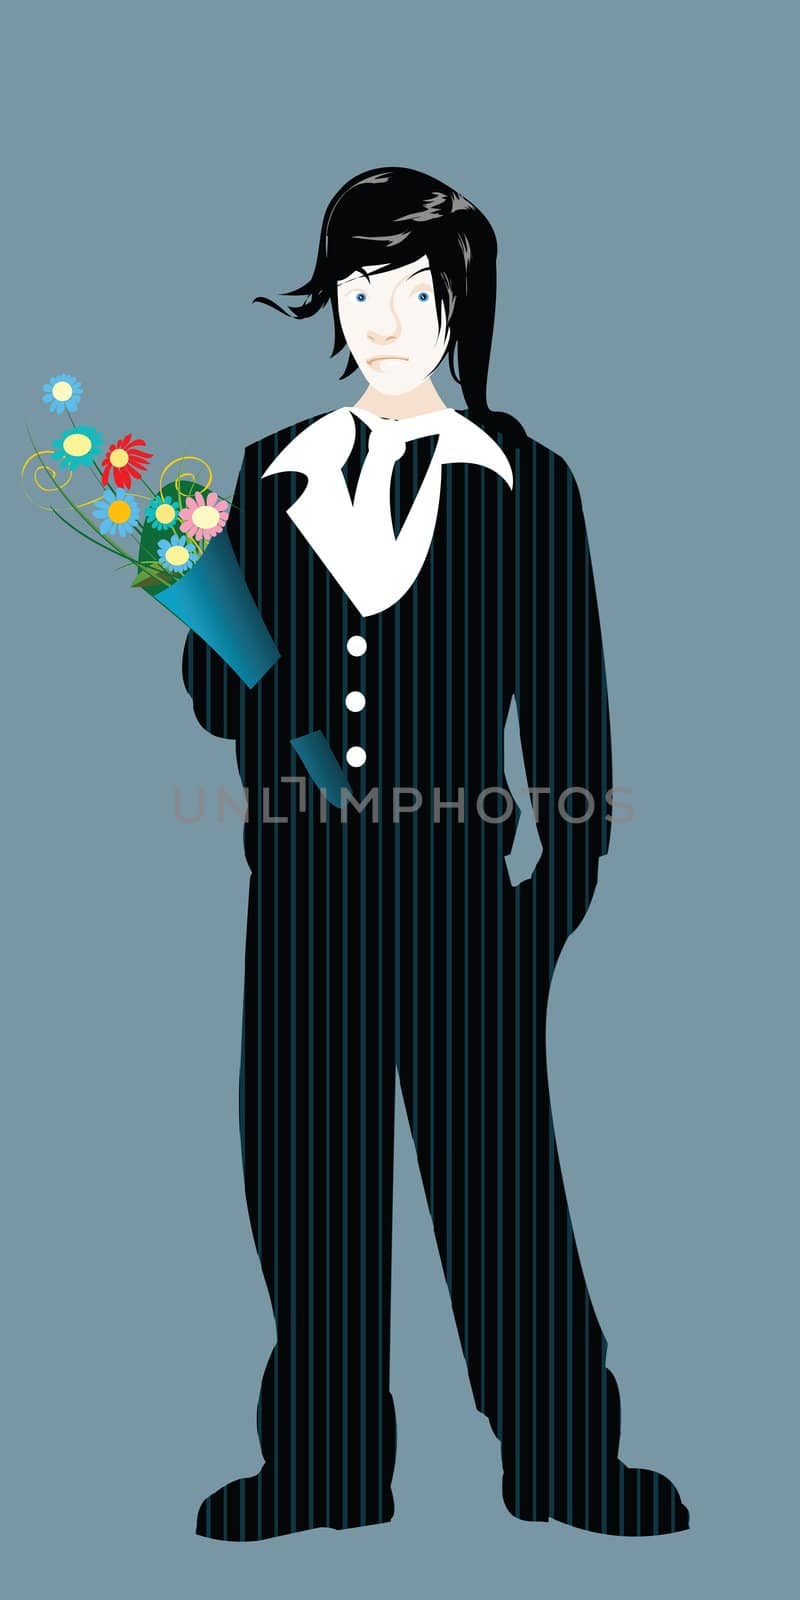 urban youngster in a striped suit with flowers